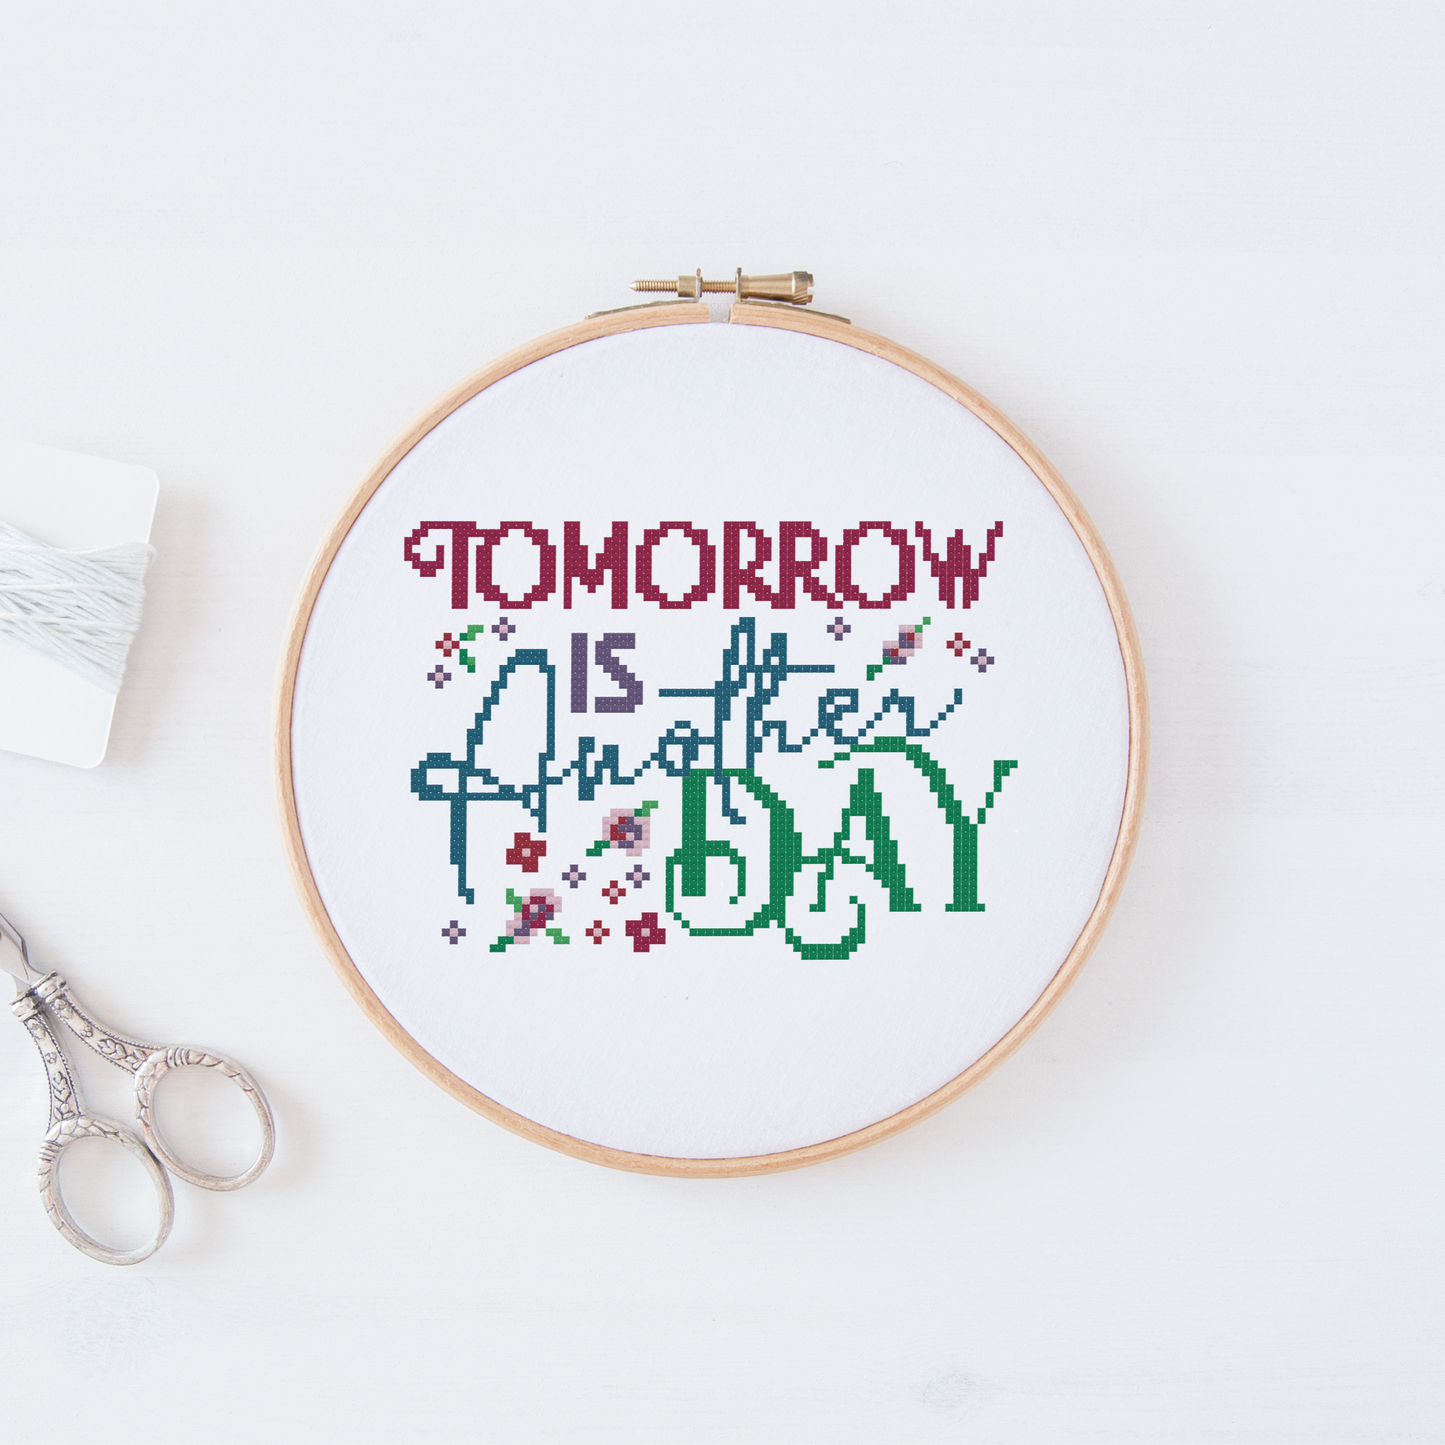 Tomorrow is another day cross stitch kit in embroidery hoop from F&B Crafts